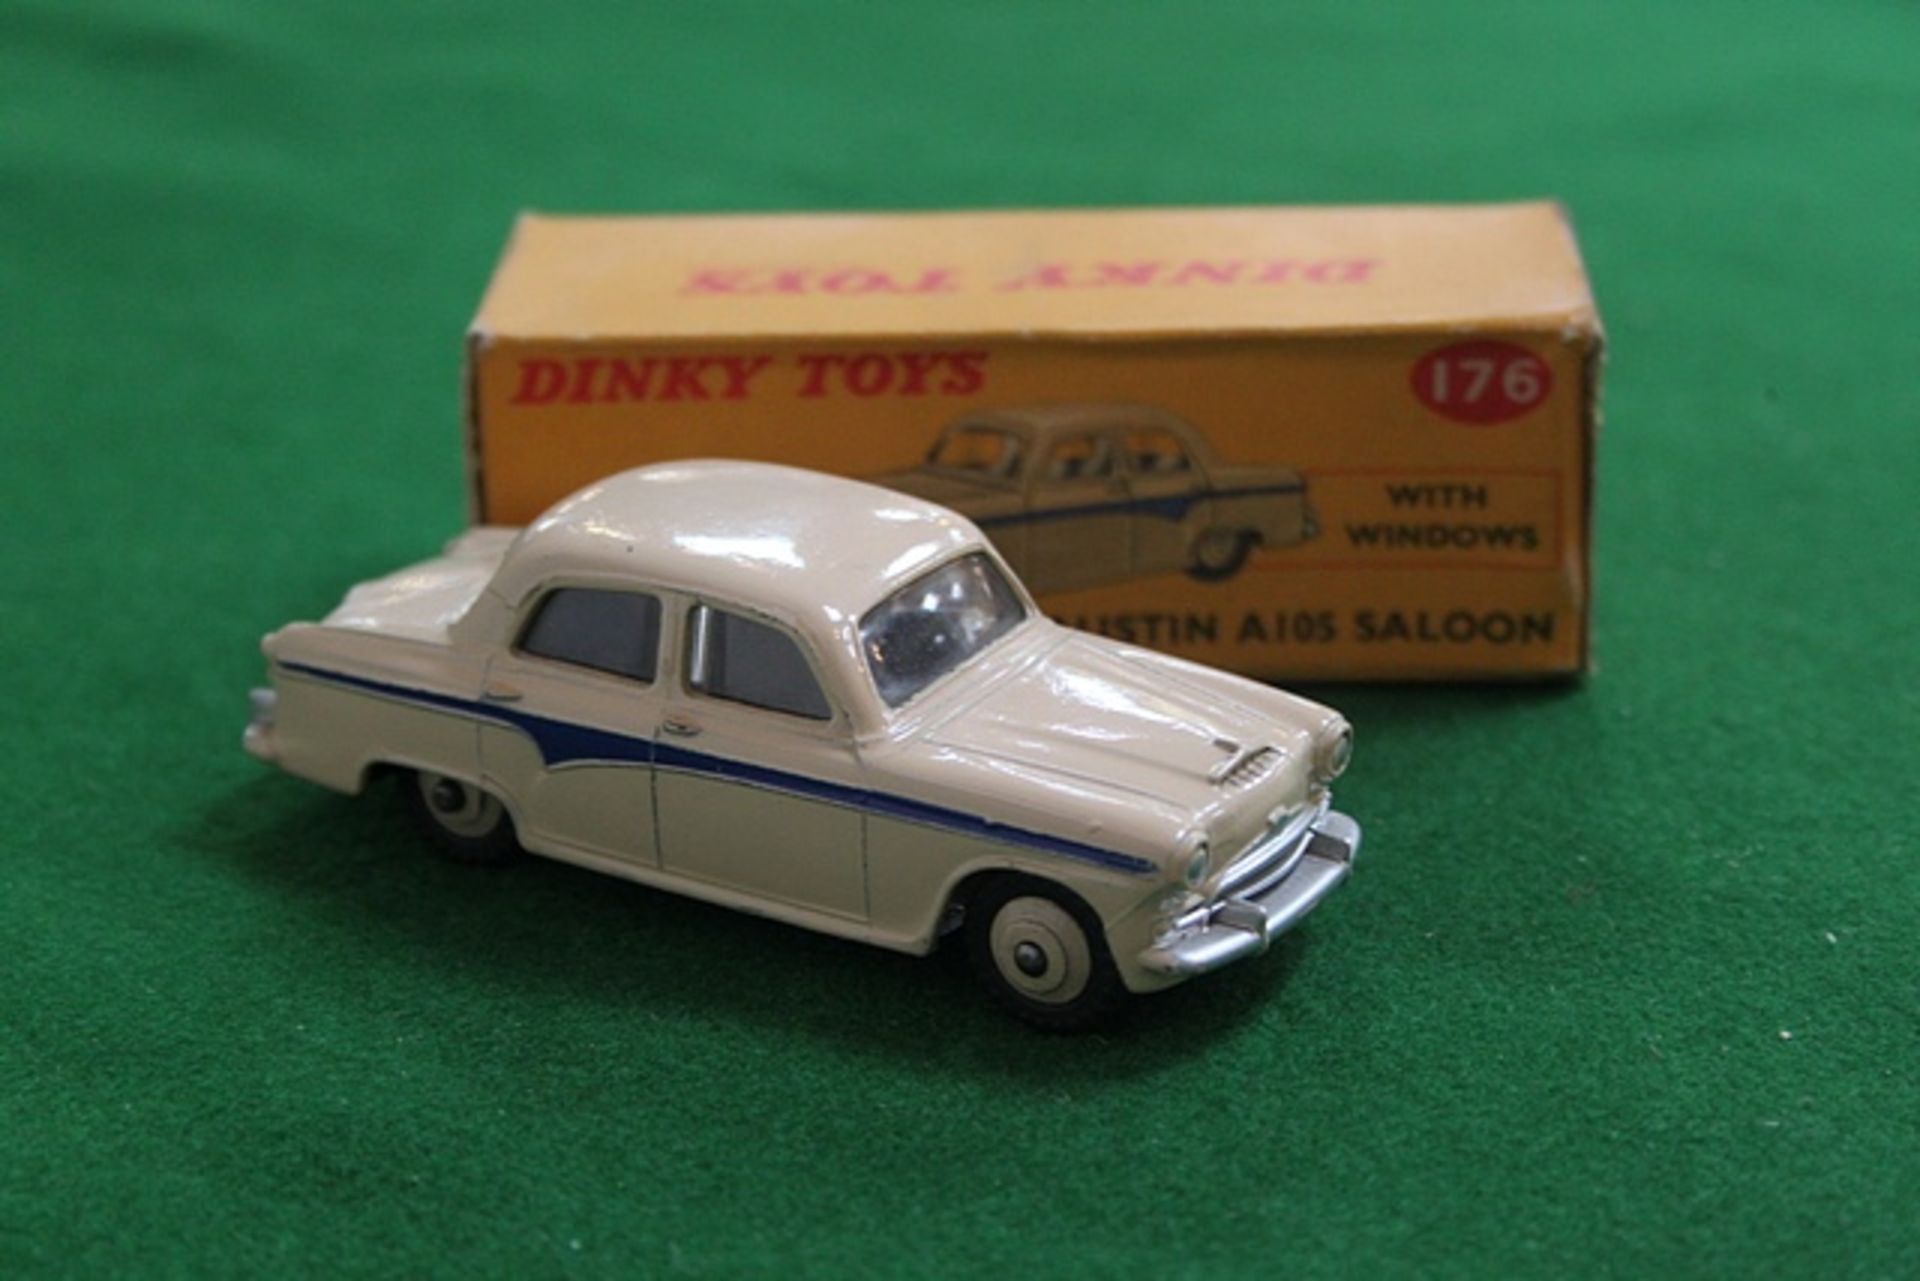 Dinky Toys Diecast #176 Austin A105 Saloon In Beige With A Blue Strip Complete With Box